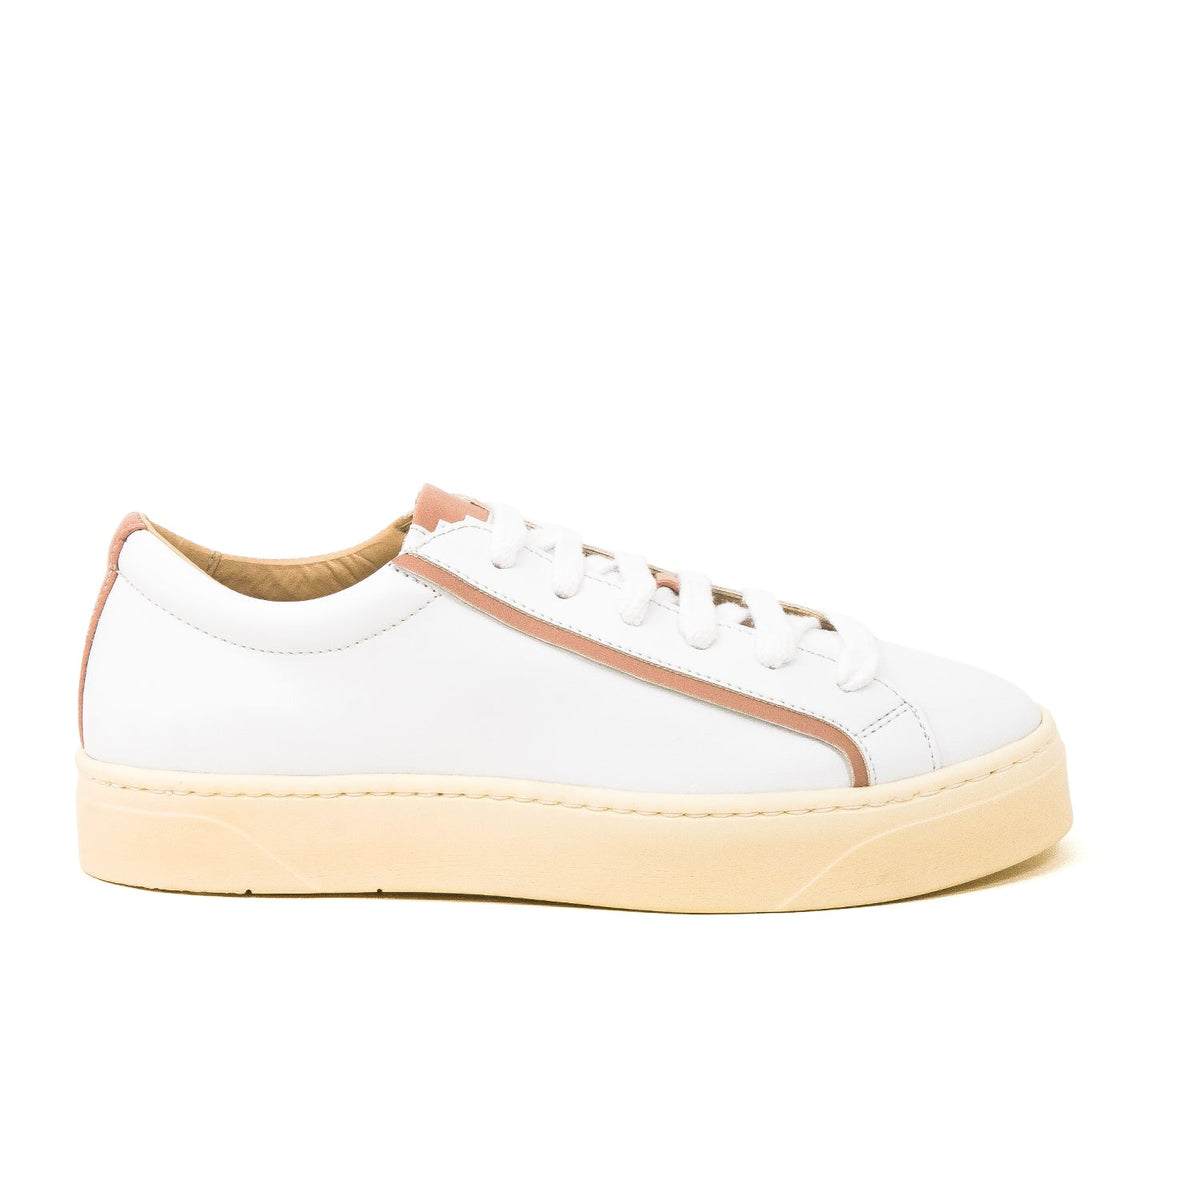 Sylven New York vegan apple leather sneakers in white and rose